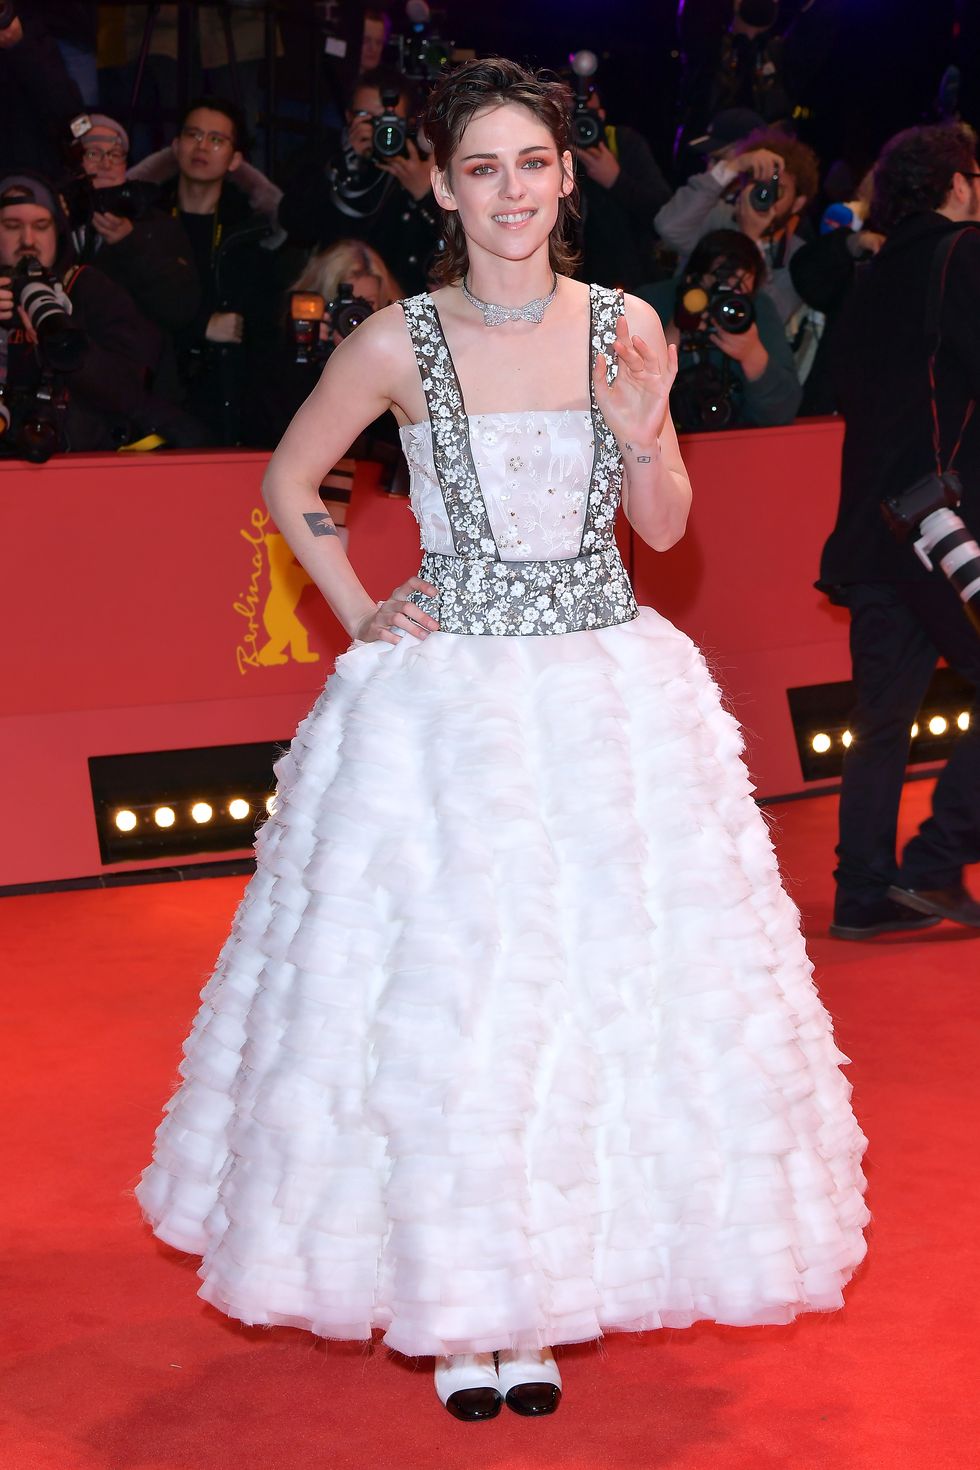 "she came to me" premiere opening ceremony red carpet 73rd berlinale international film festival